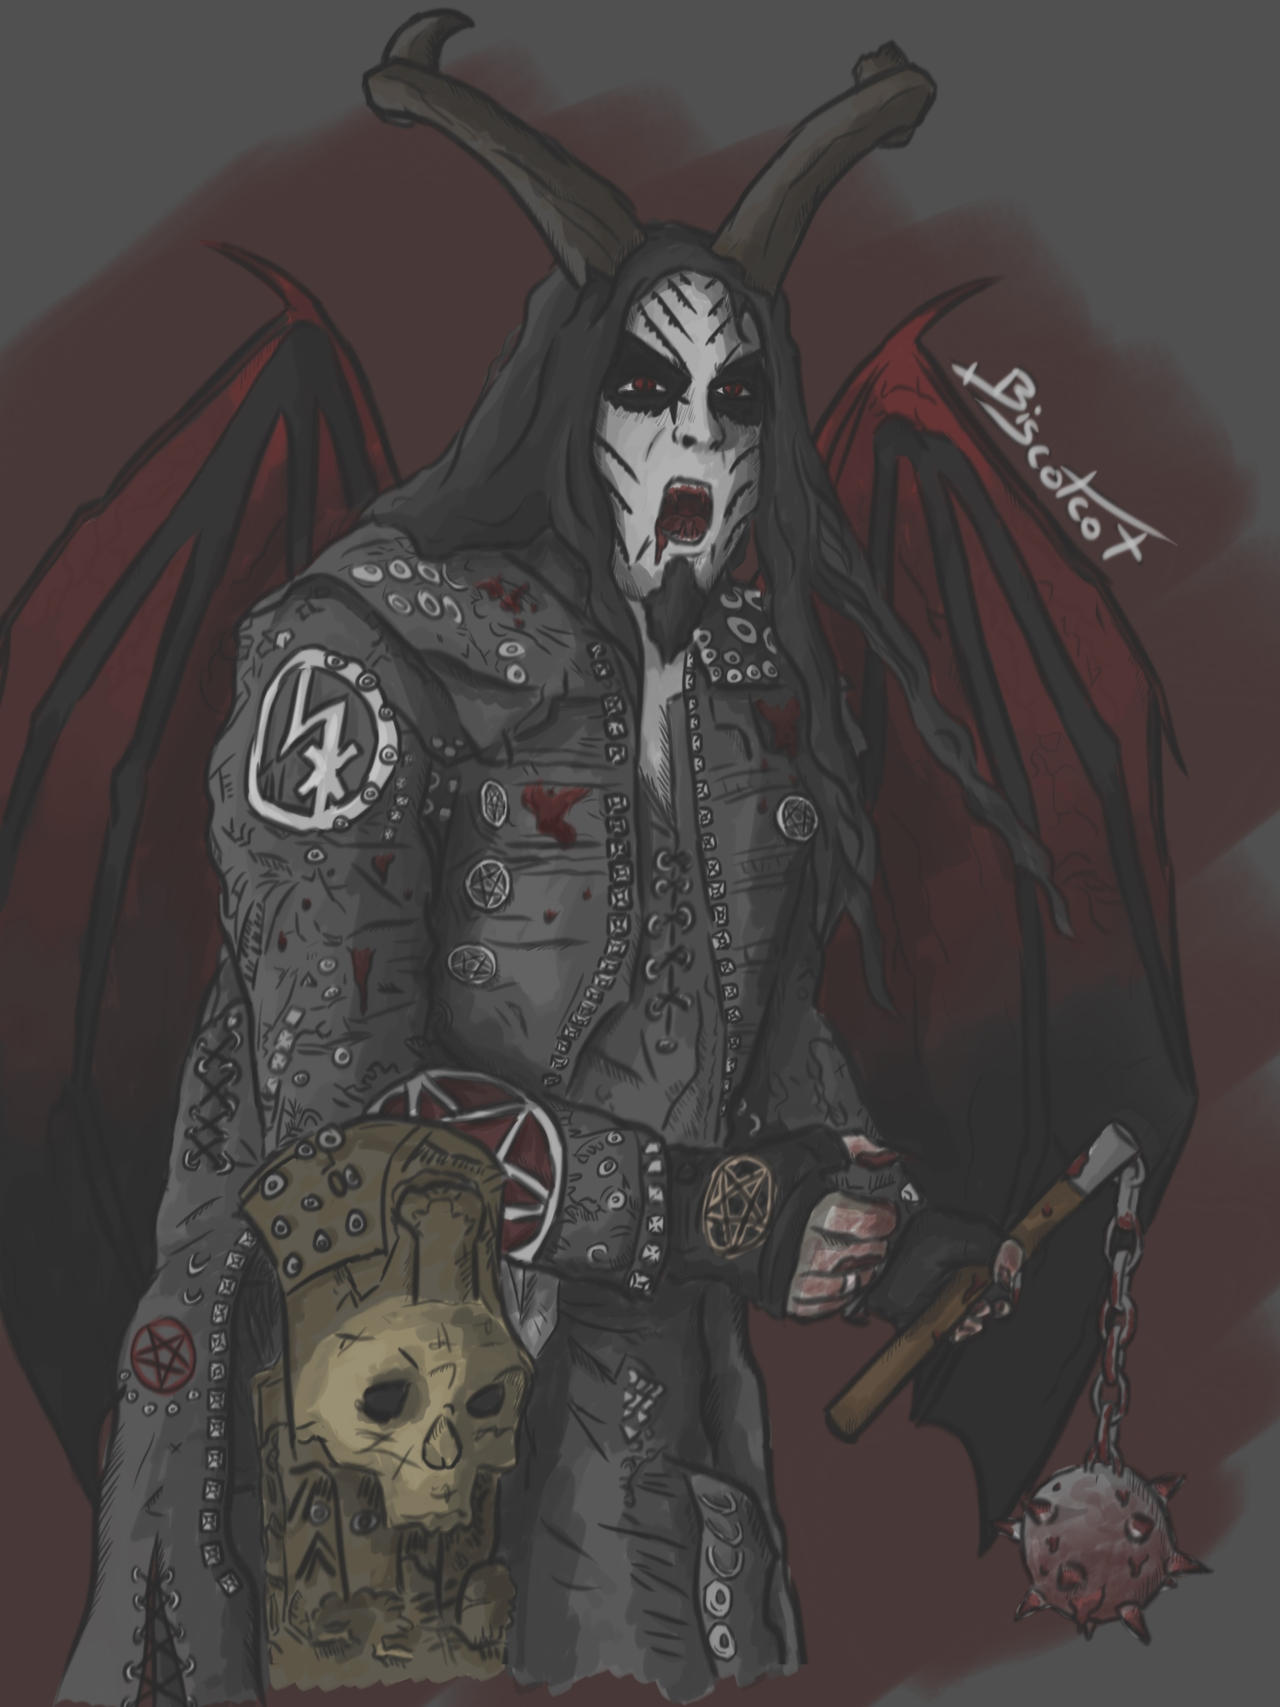 Picture of Shagrath